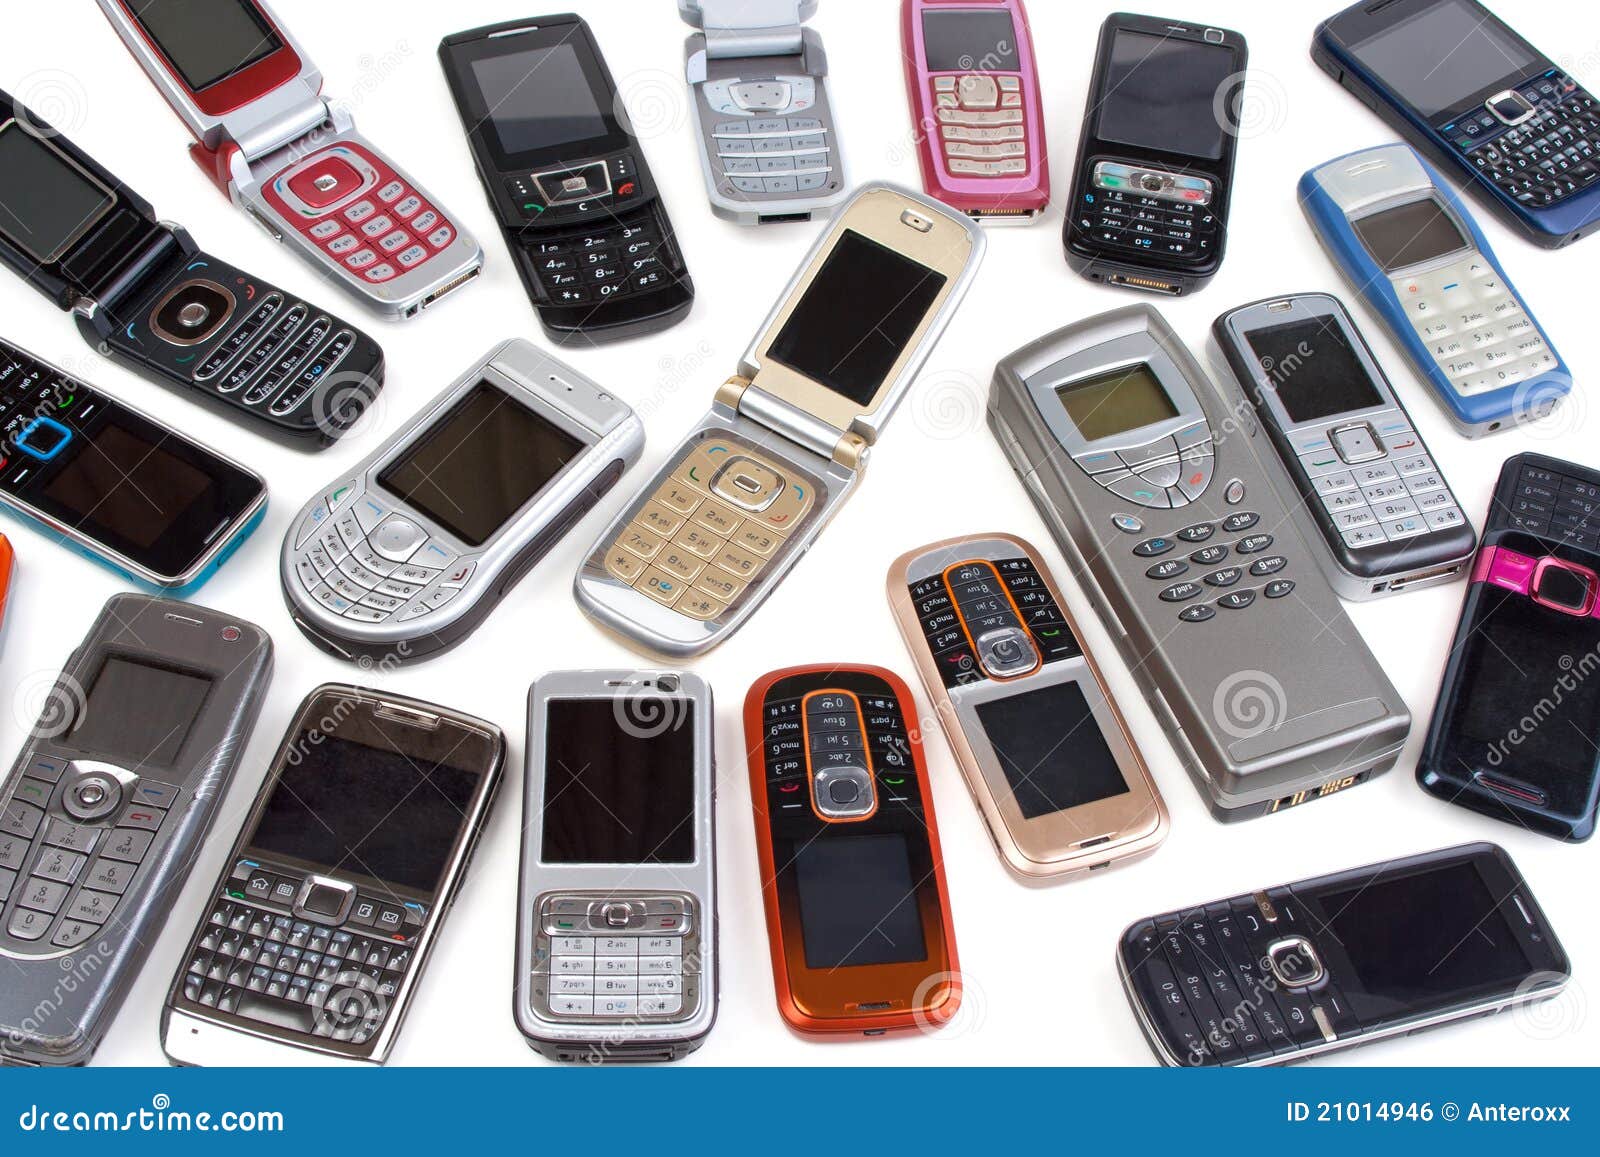 Different Cell Phones Royalty Free Stock Image - Image: 21014946